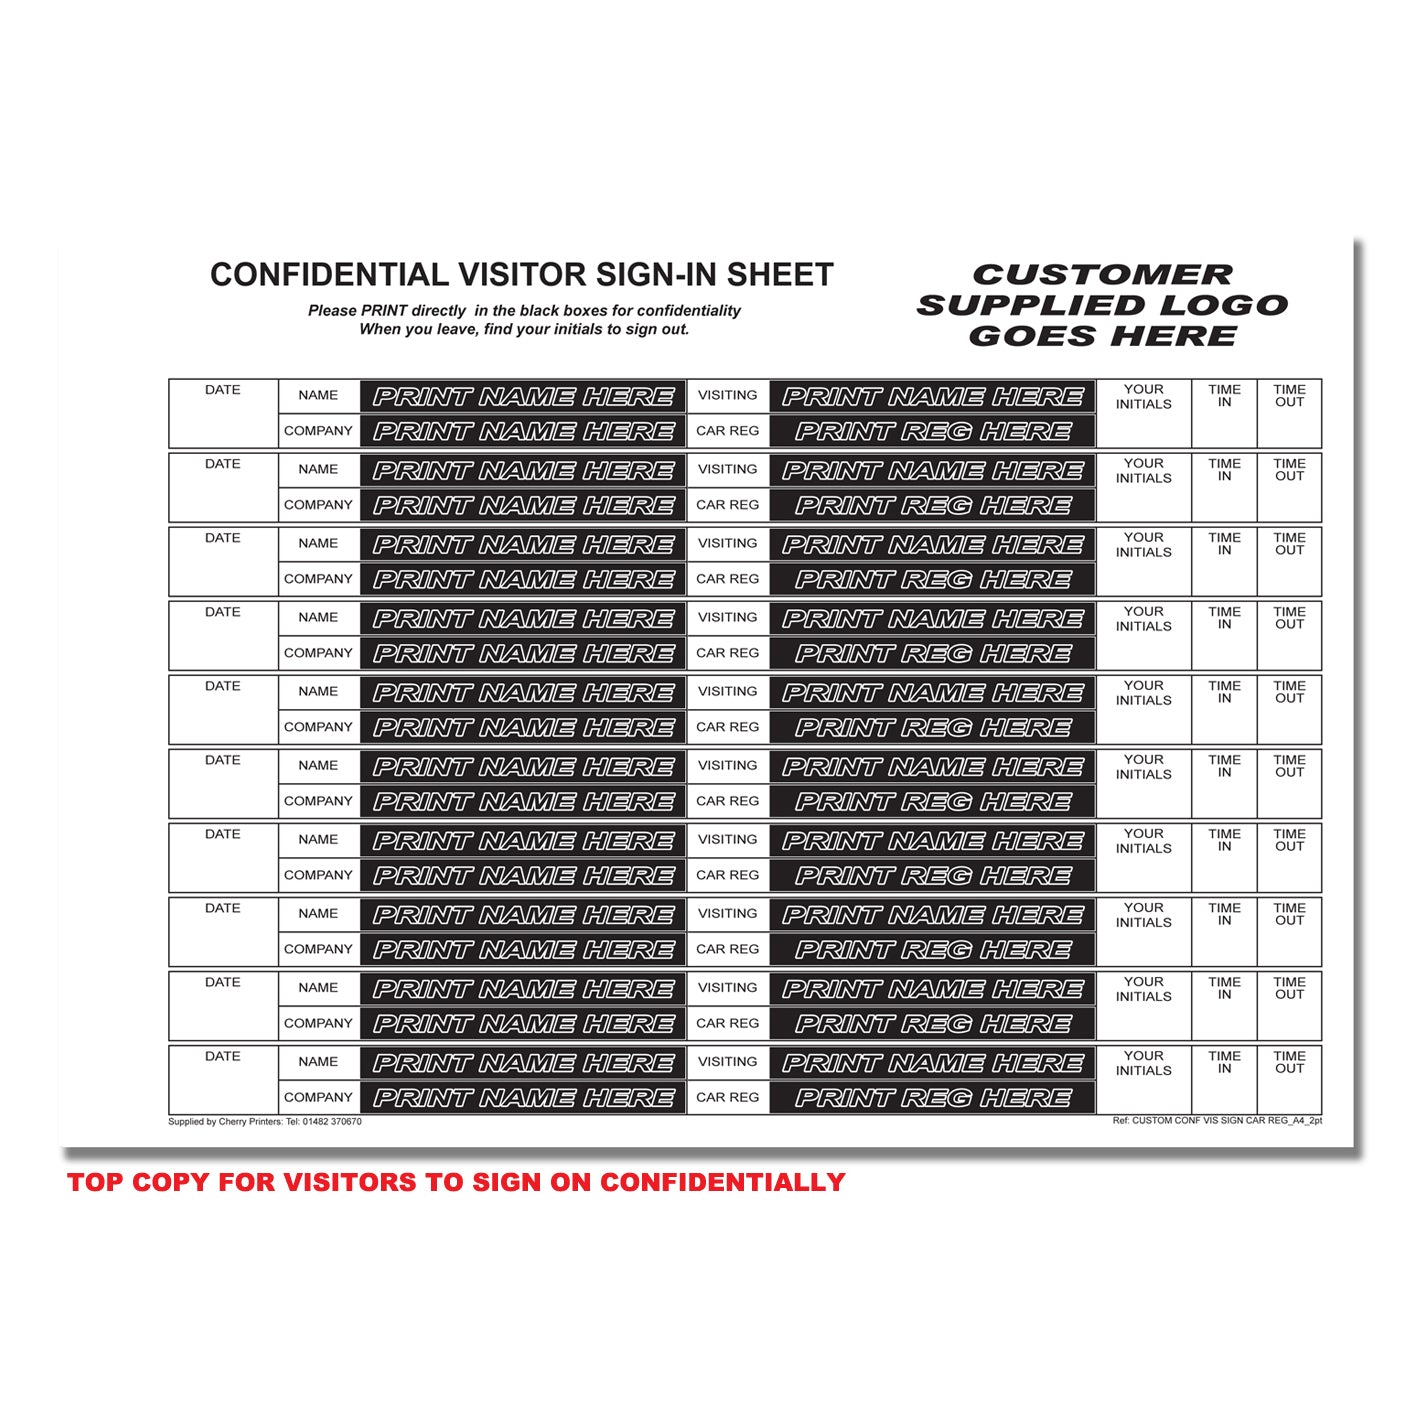 NCR *CUSTOM* Confidential Visitor Sign in With CAR REG Wiro Book A4 50 sets | 2 Book Pack